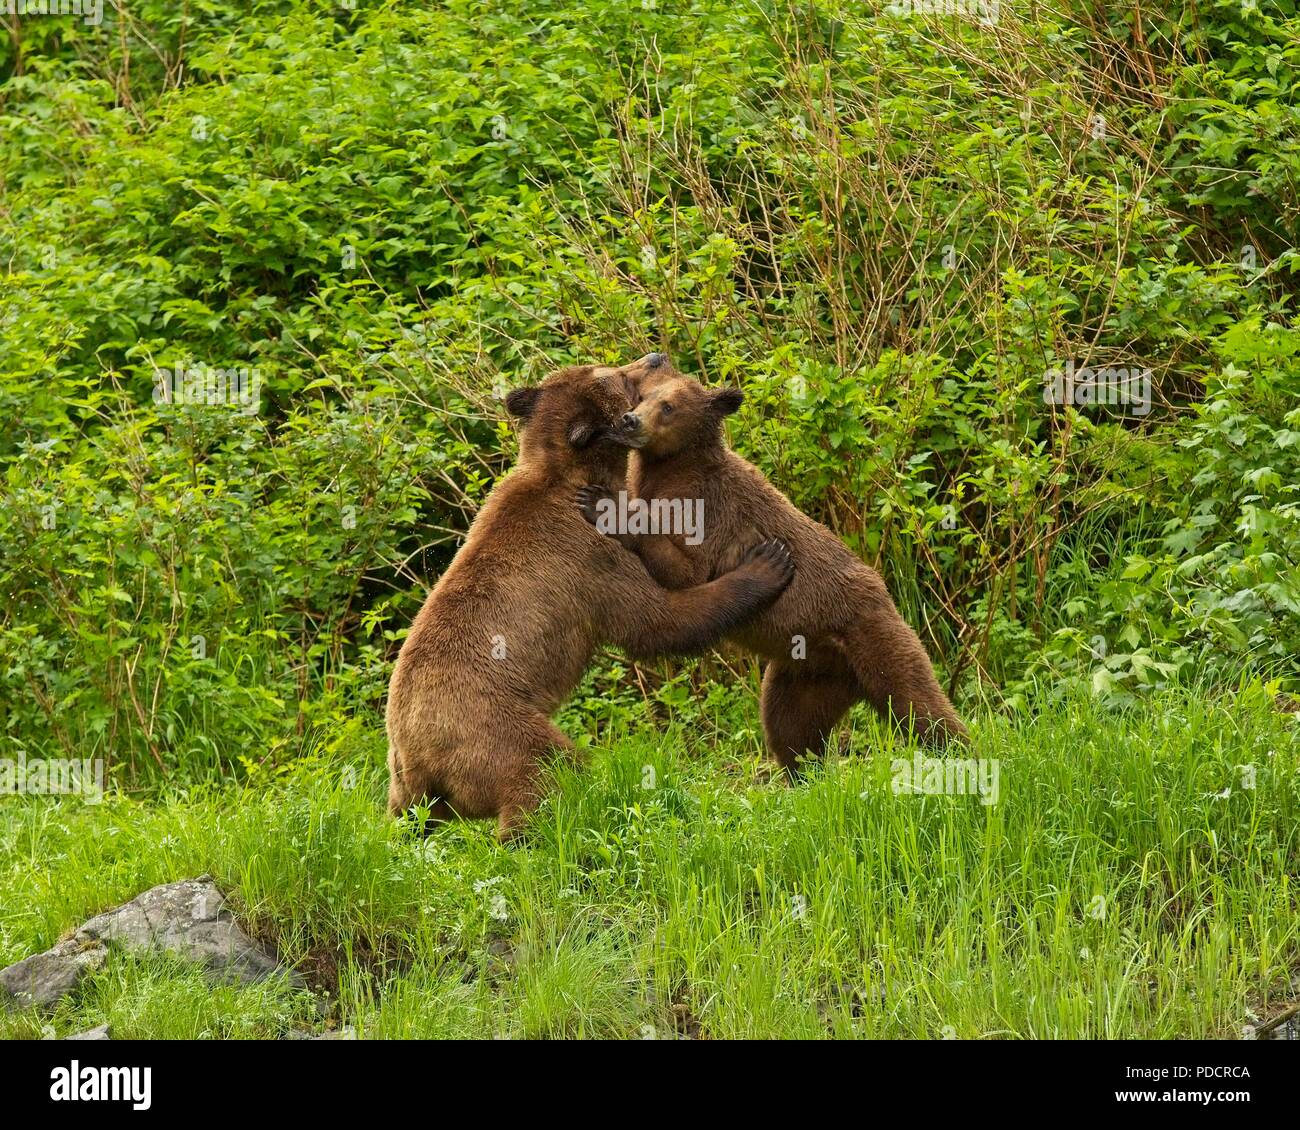 Grizzly Bears Mating in Great Bear Rainforest, British Columbia, Canada Stock Photo